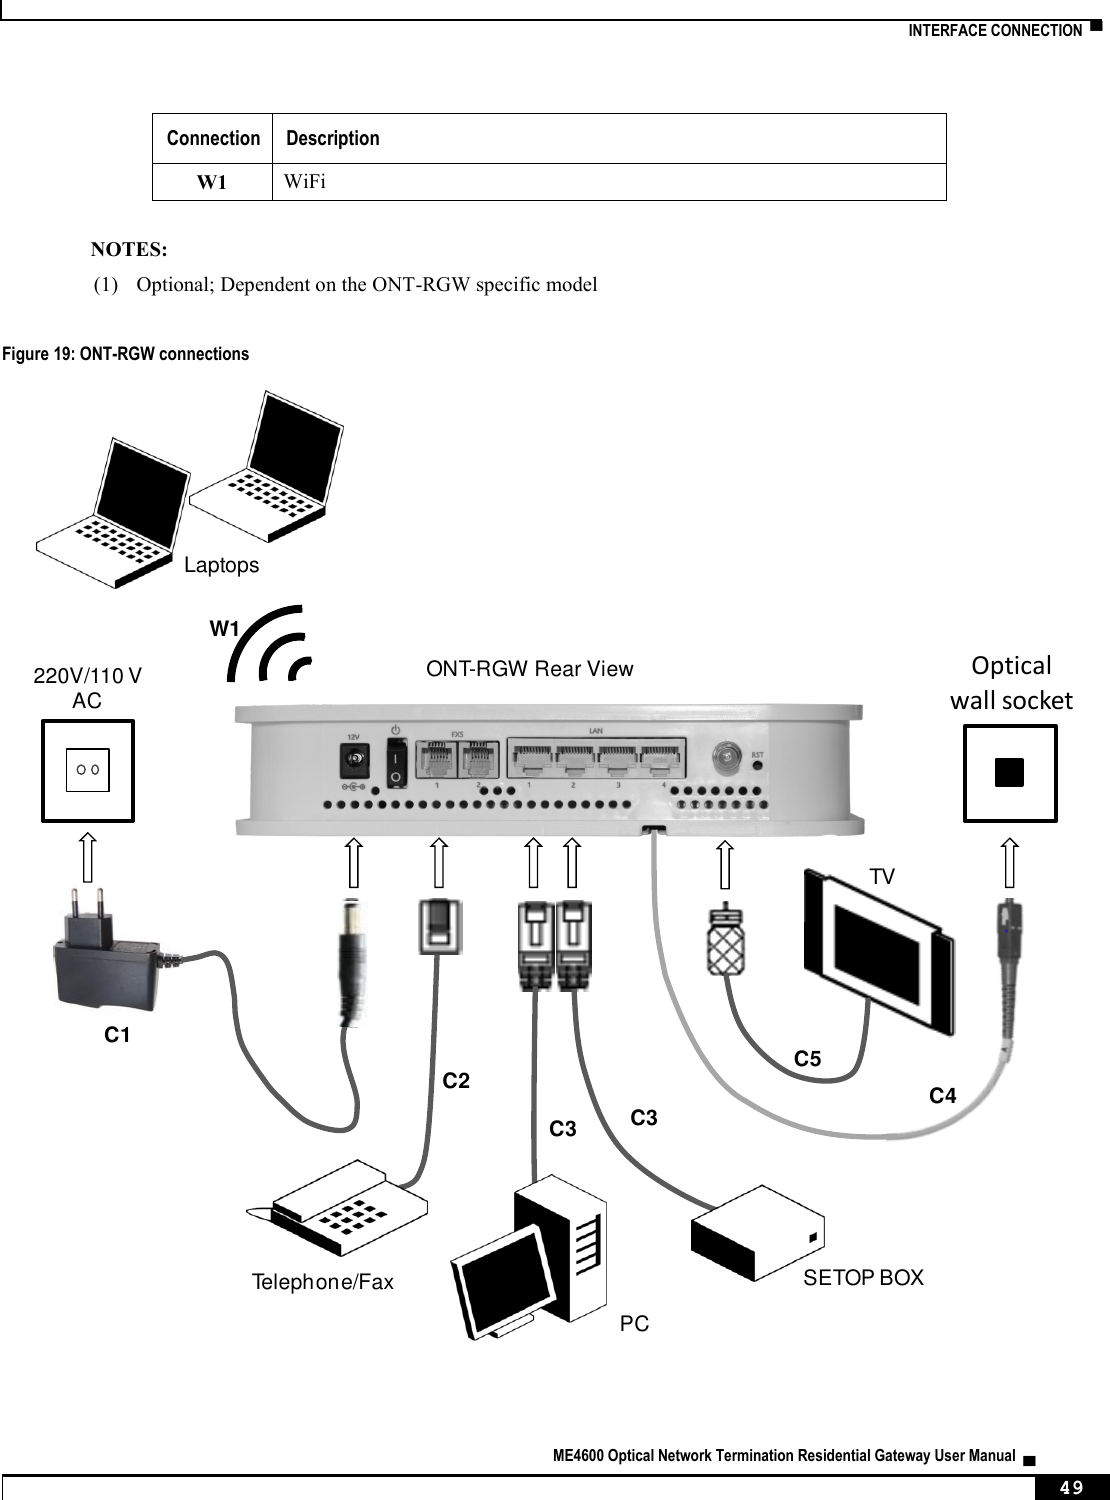    INTERFACE CONNECTION  ▀   ME4600 Optical Network Termination Residential Gateway User Manual  ▄     49 Connection Description W1 WiFi  NOTES: (1)  Optional; Dependent on the ONT-RGW specific model  Figure 19: ONT-RGW connections    Optical wall socketLaptopsPCSETOP BOXTelephone/Fax220V/110 VACONT-RGW Rear ViewC4C3C3C2C1W1C5TV